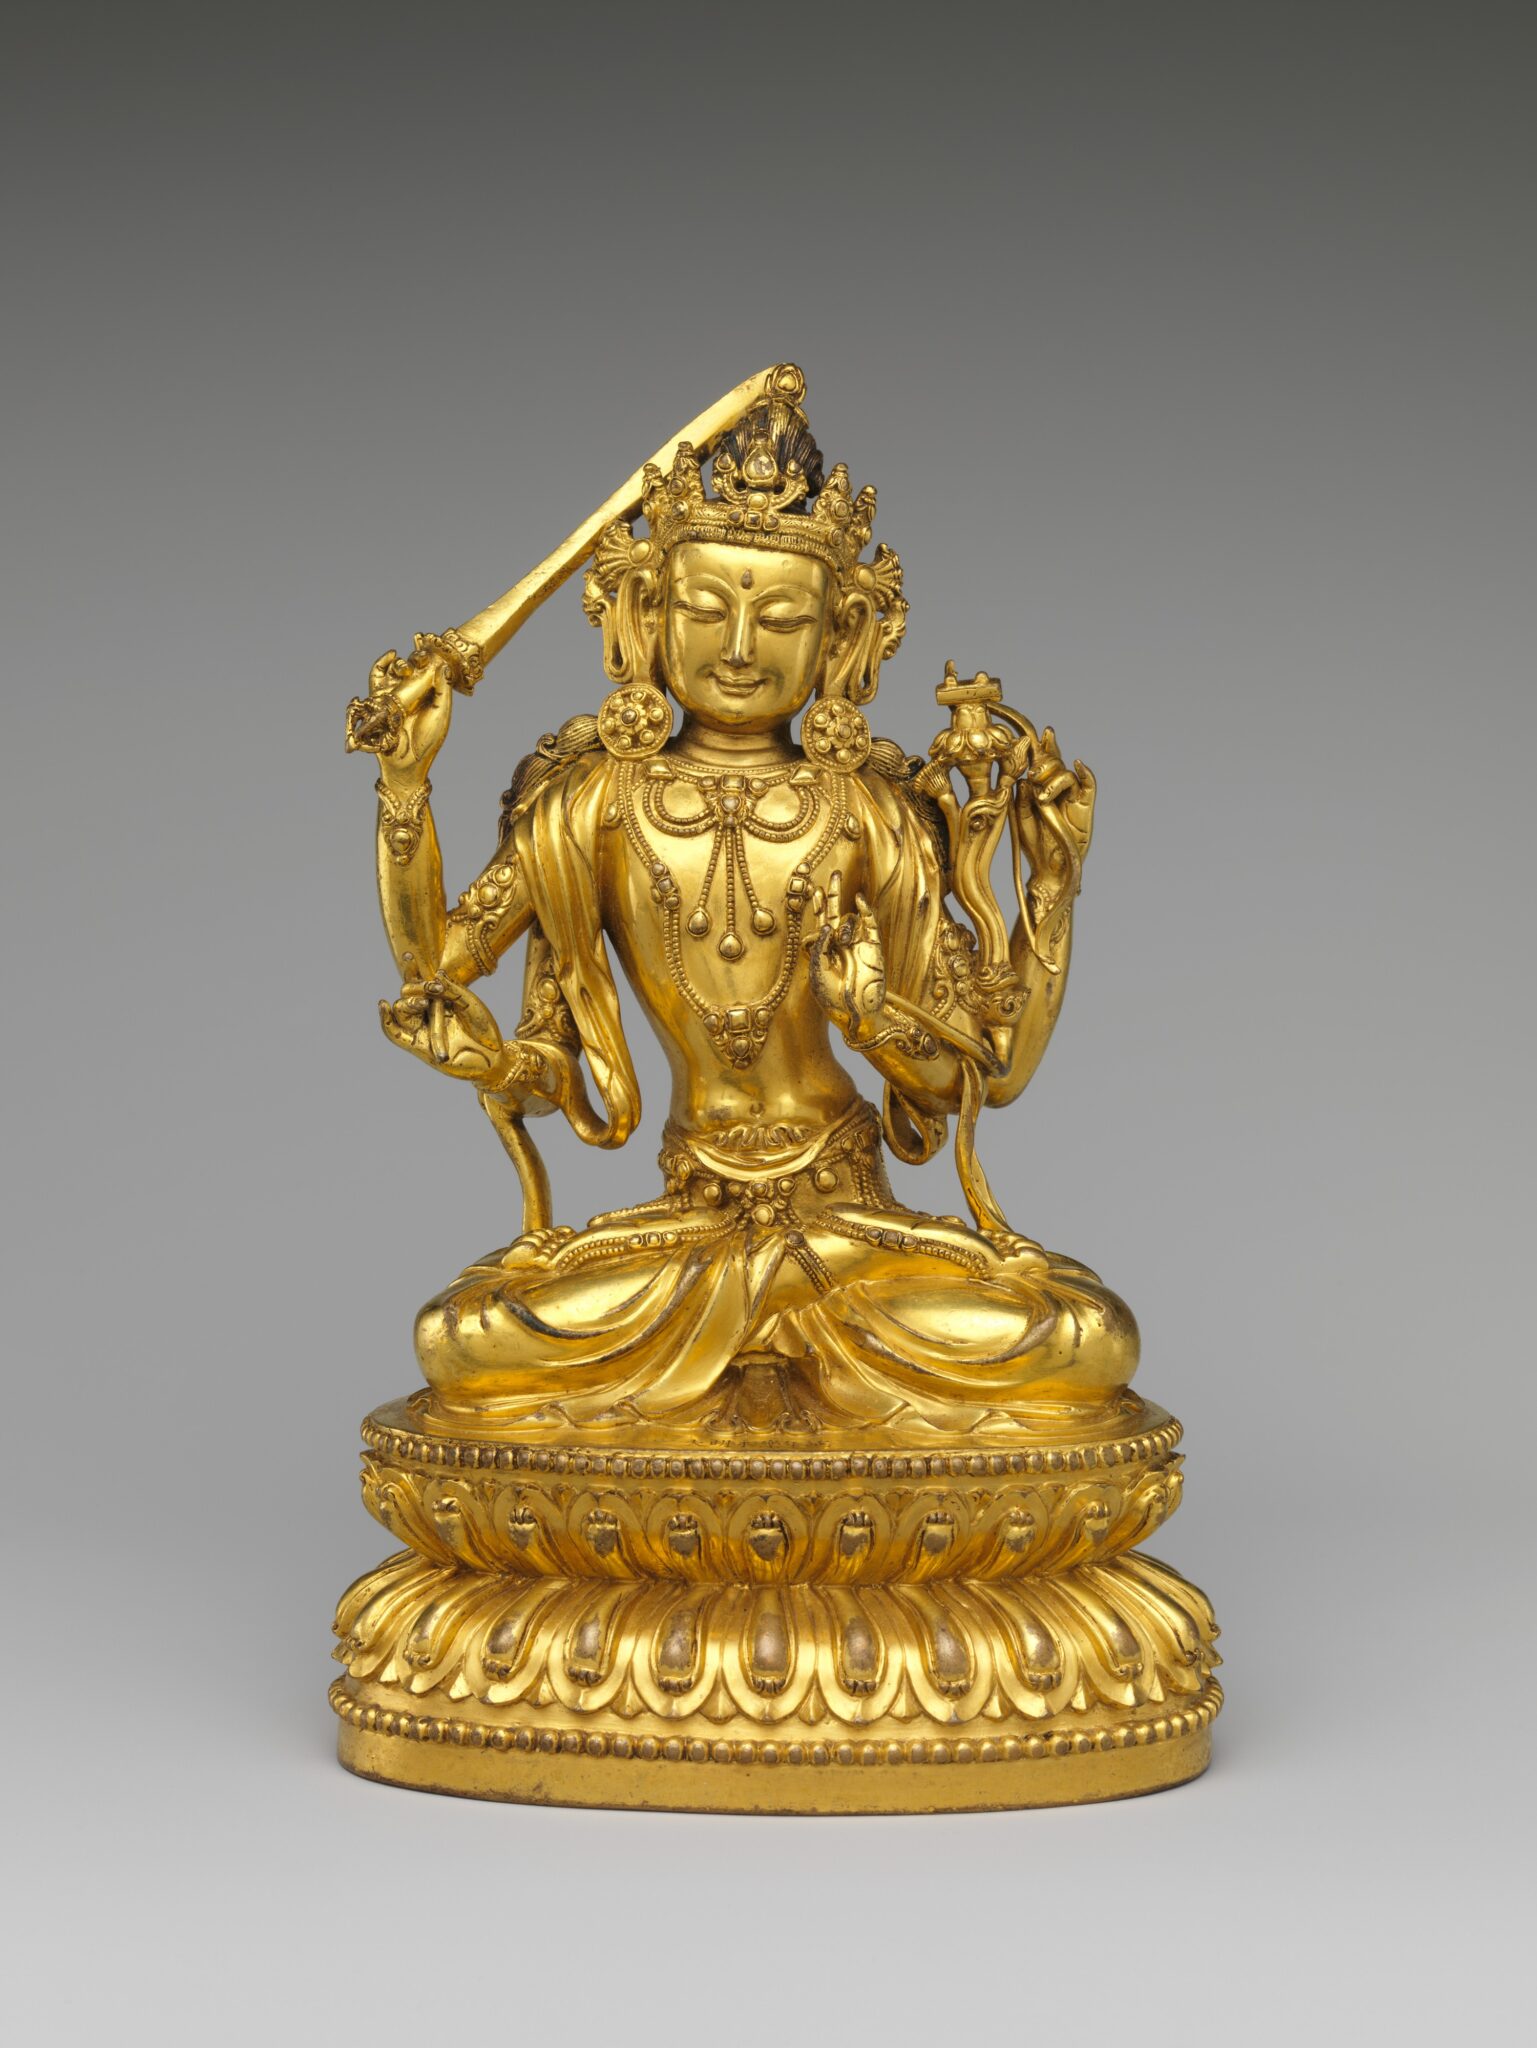 Gilded statuette of seated, four-armed Bodhisattva holding sword in leftmost hand and spiritual implements in others